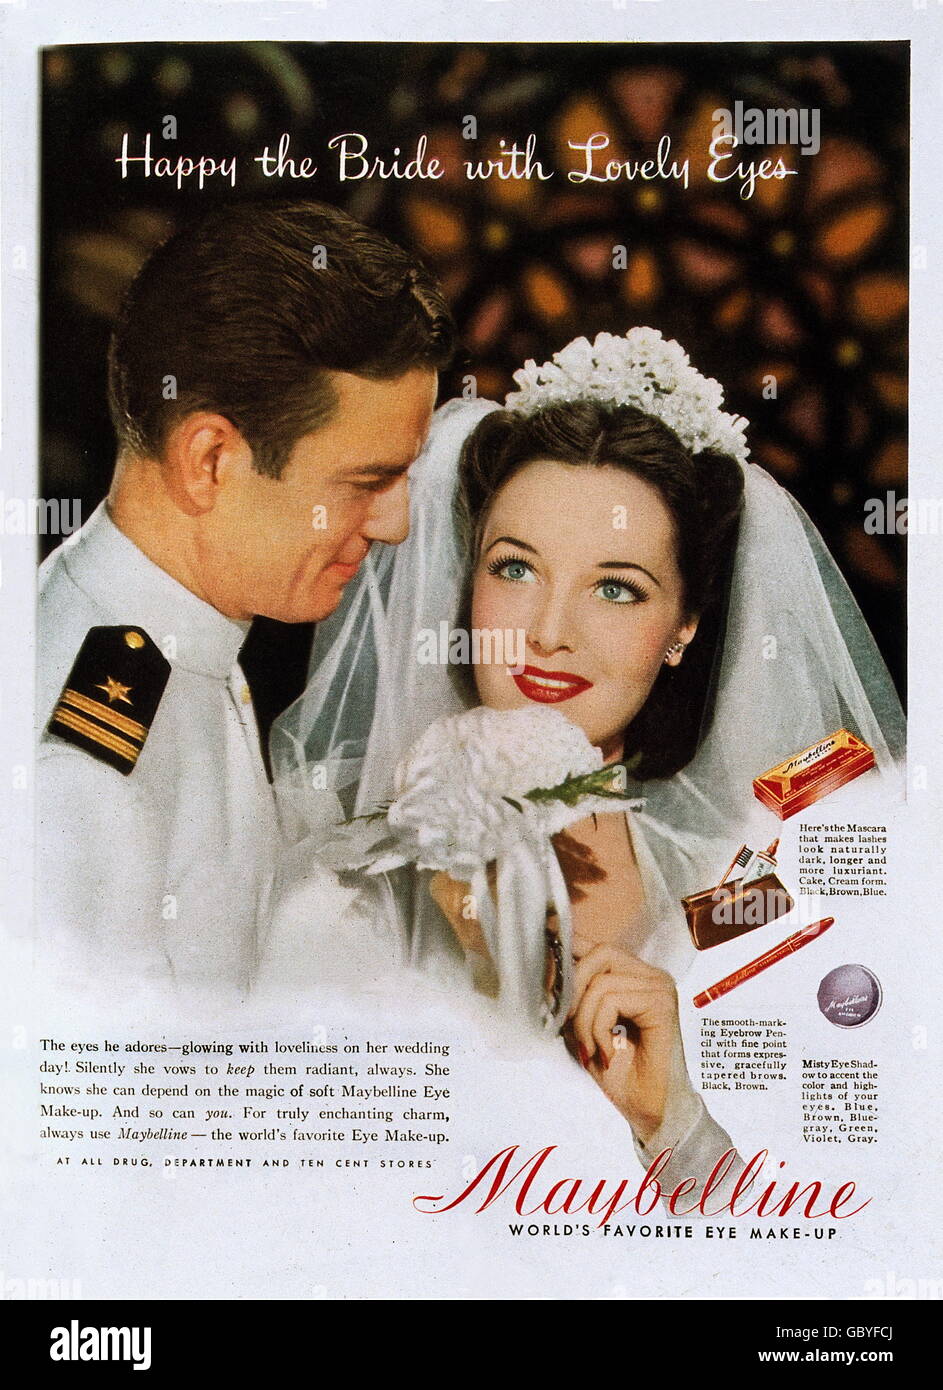 Pubblicità, cosmetica, trucco, Maybelline Eye Make-Up, 'Happy the Bride  with Lovely Eyes', pubblicità, in inglese, anni '50,  Additional-Rights-Clearences-Not Available Foto stock - Alamy